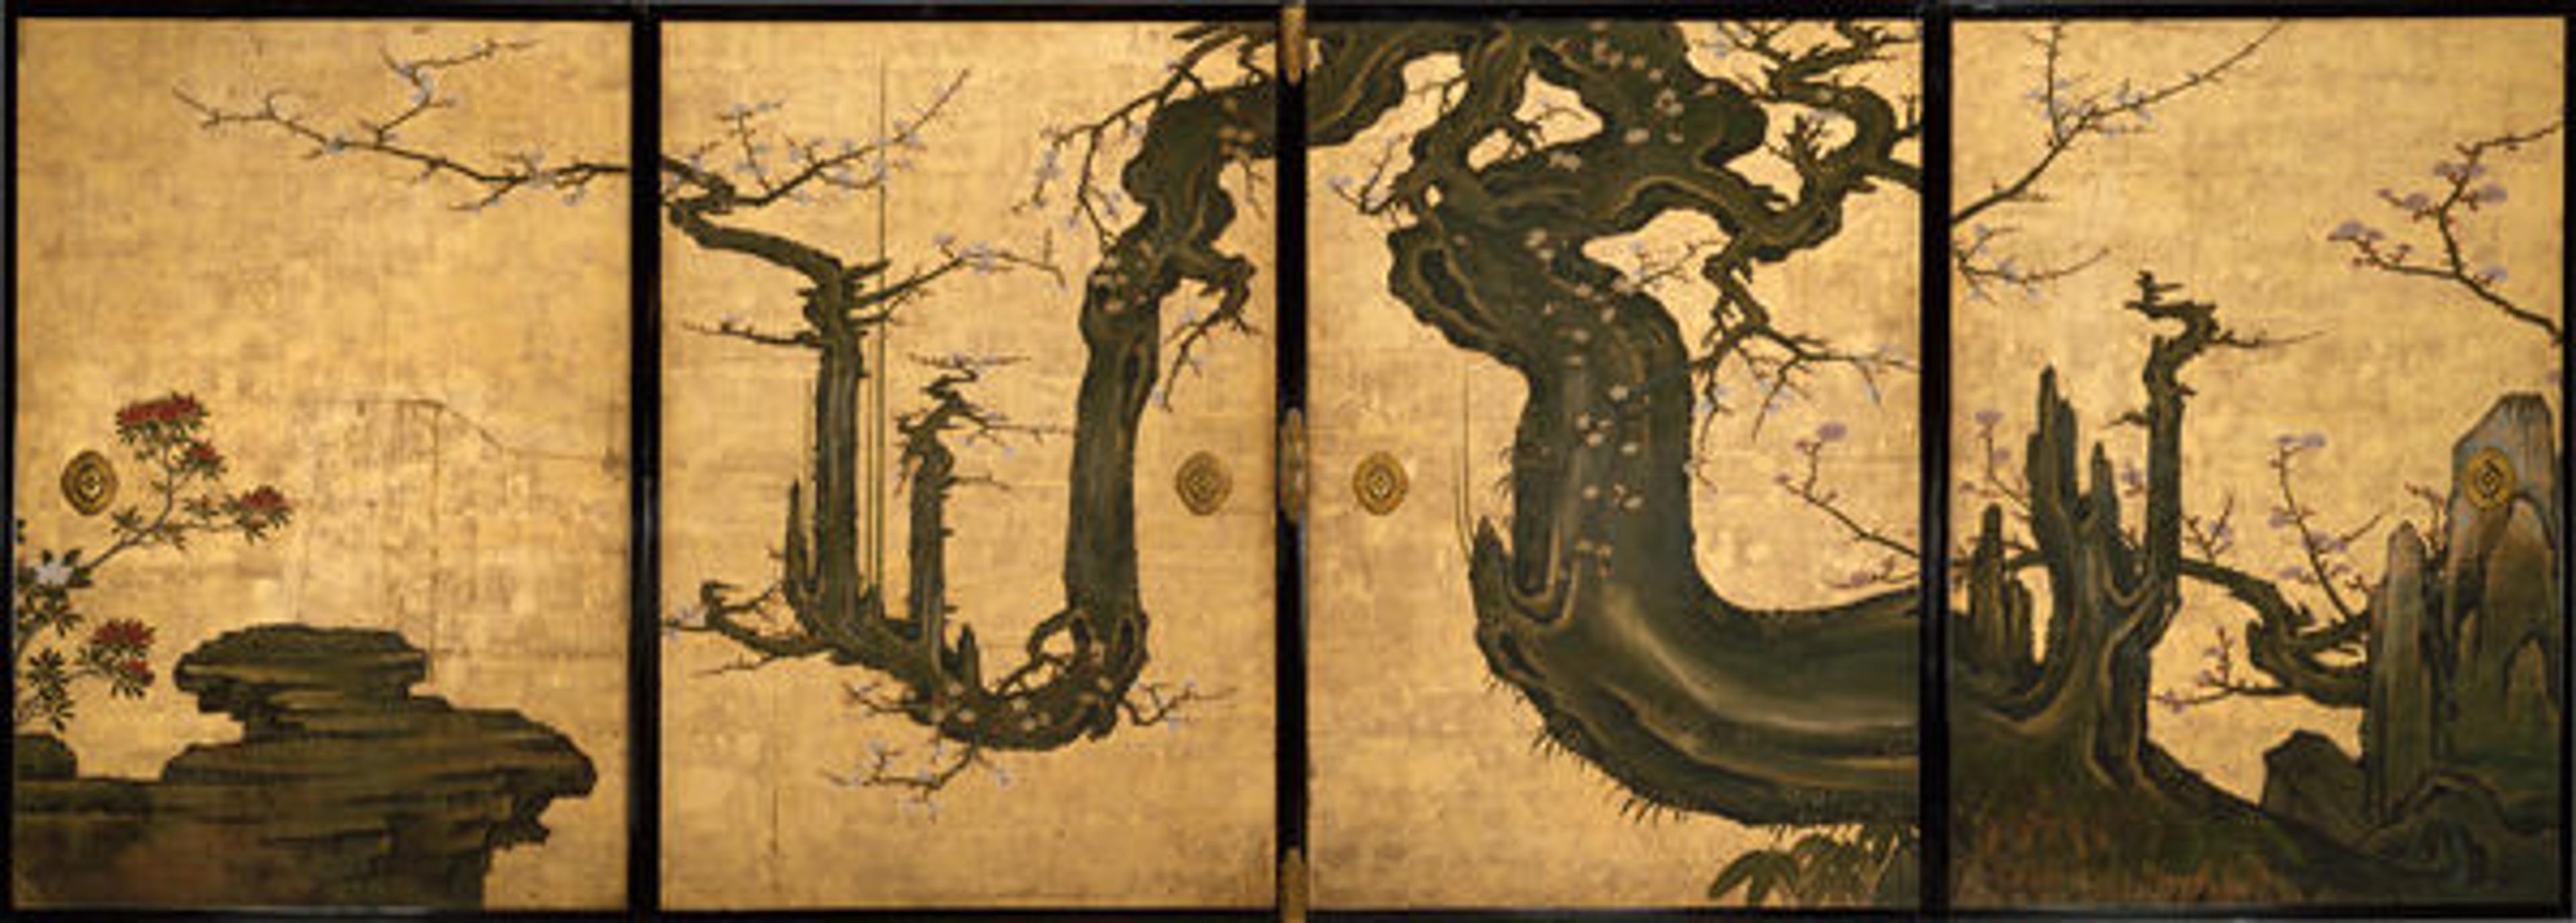 Kano Sansetsu (Japanese, 1590–1651). The Old Plum, 1646. Japan, Edo period (1615–1868). Four sliding-door panels (fusuma); ink, color, gold, and gold leaf on paper; Overall (of all four panels): 68 3/4 x 191 1/8 in. (174.6 x 485.5 cm). The Metropolitan Museum of Art, New York, The Harry G. C. Packard Collection of Asian Art, Gift of Harry G. C. Packard, and Purchase, Fletcher, Rogers, Harris Brisbane Dick, and Louis V. Bell Funds, Joseph Pulitzer Bequest, and The Annenberg Fund Inc. Gift, 1975 (1975.268.48a–d)